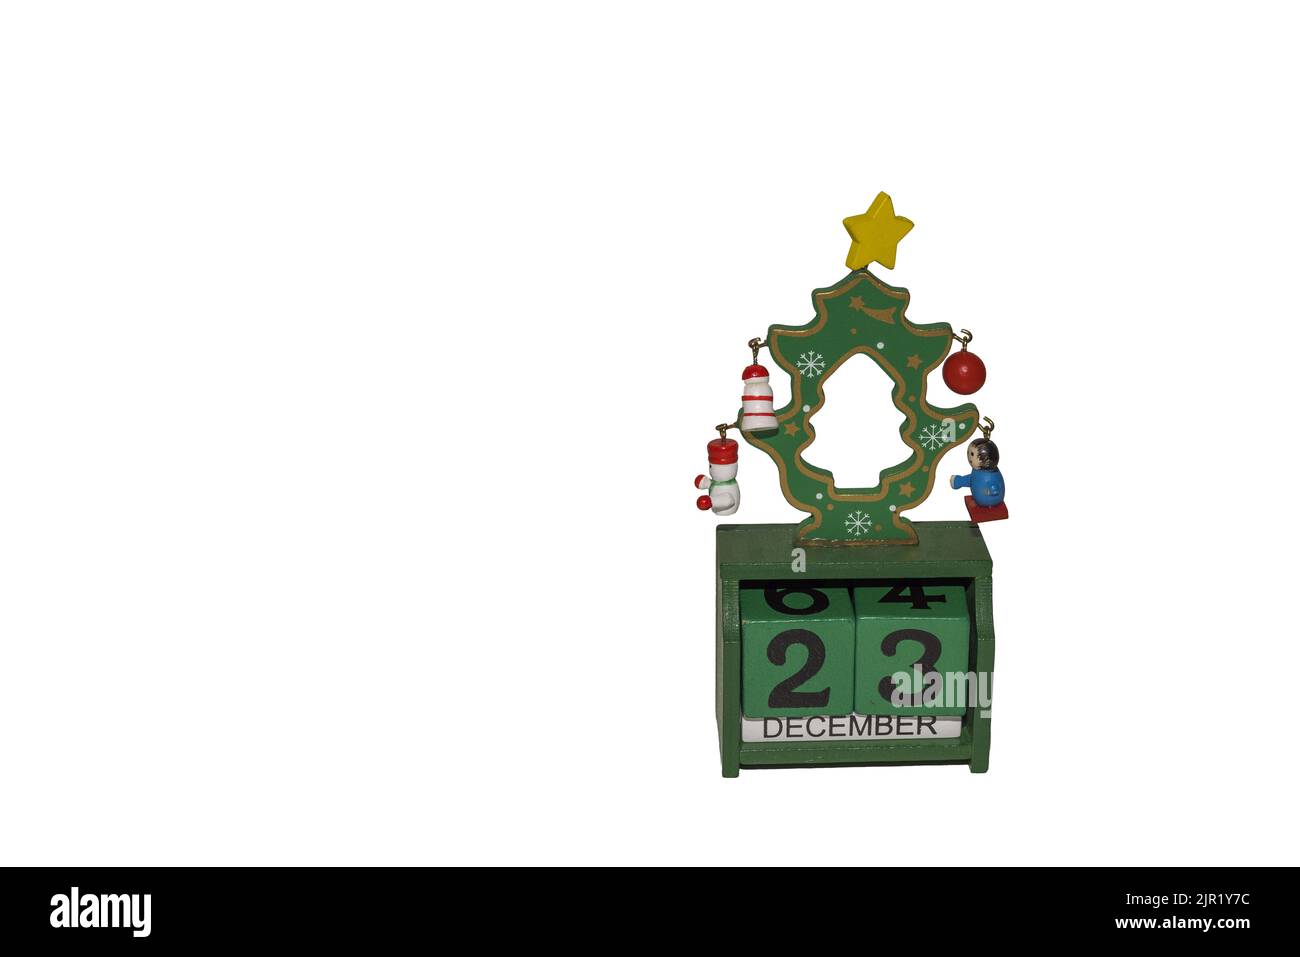 Close up view of green cube  calendar showing 23 December. White background. Sweden. Stock Photo